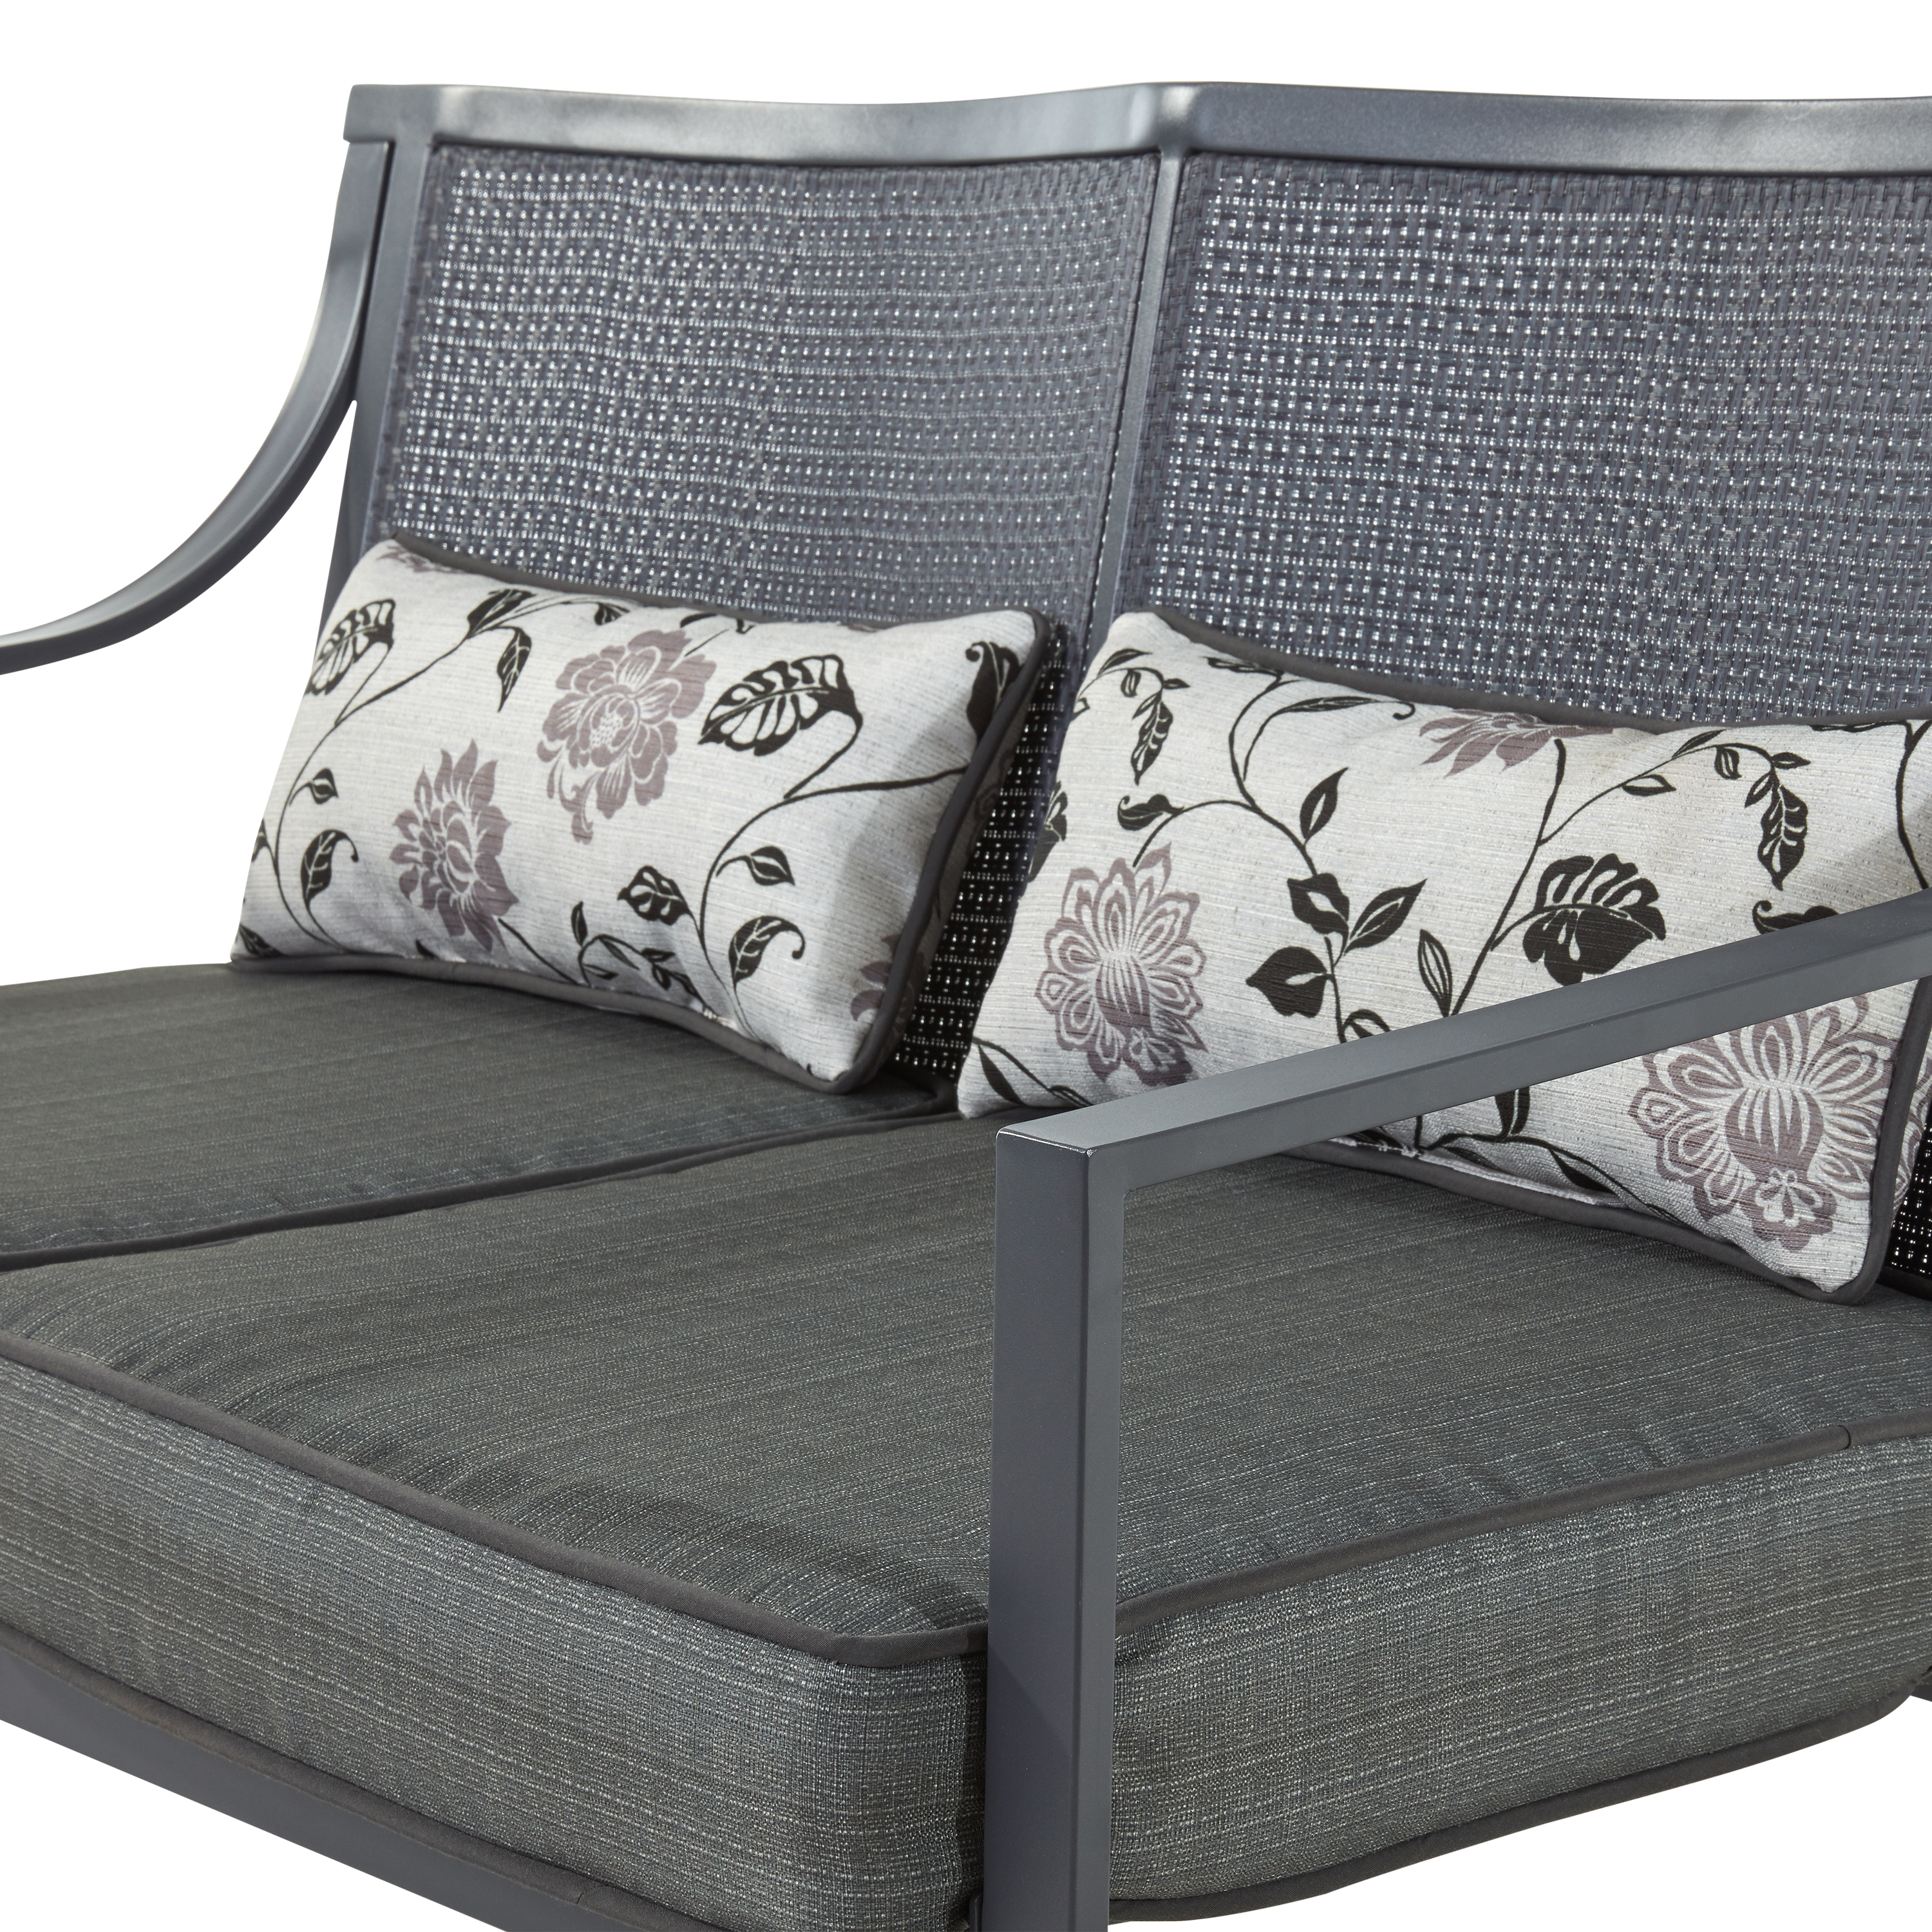 Mainstays Alexandra Square 4-Piece Patio Conversation Set, Grey with Leaves, Seats 4 with Gray Cushions - image 3 of 9